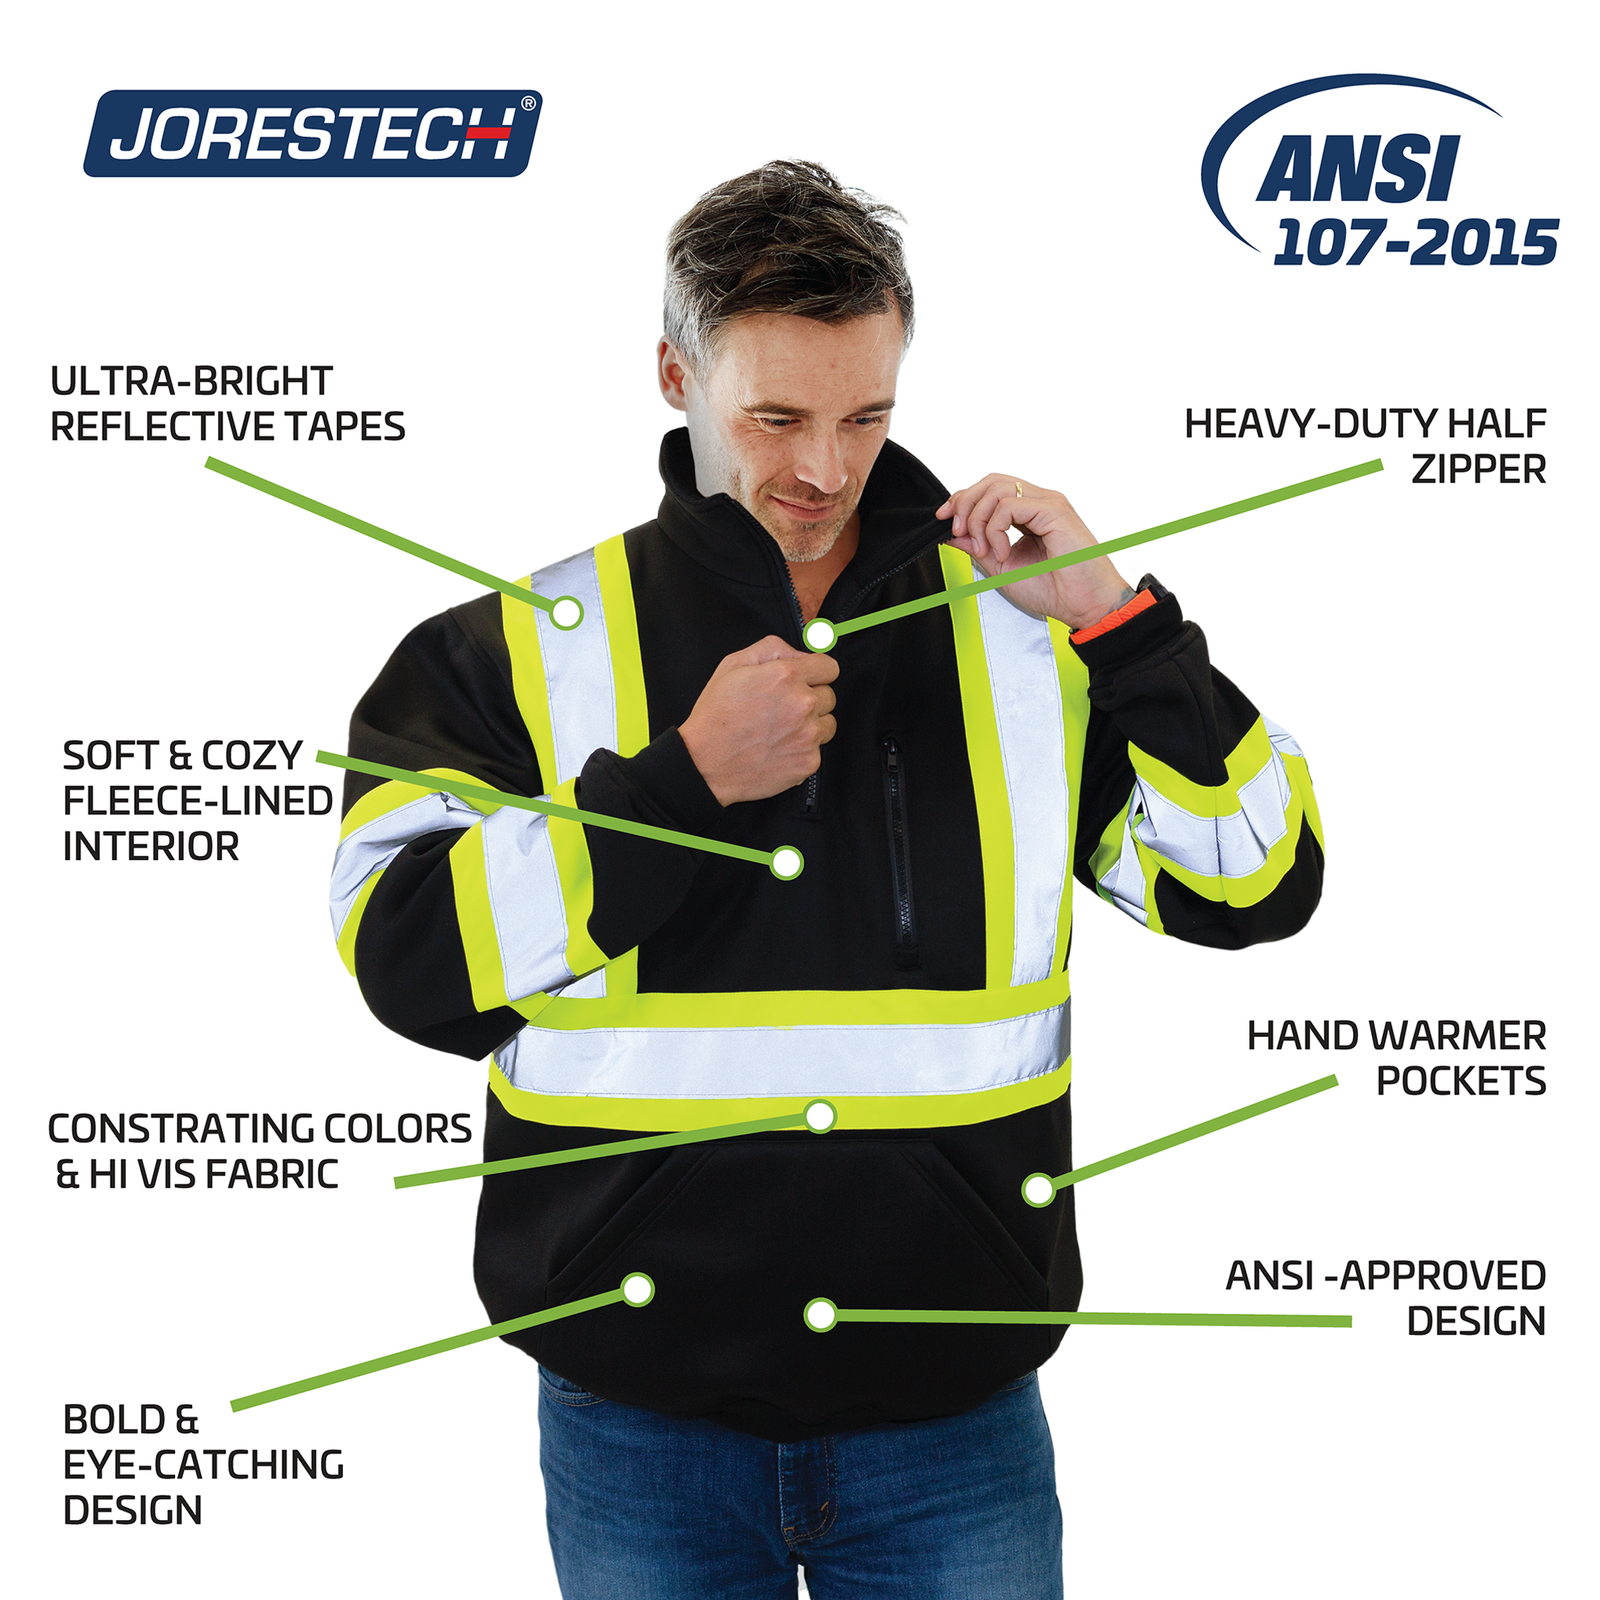 Worker wearing the JORESTECH black fleece lined safety sweater with reflective tapes, heavy duty zipper, hand pockets, and contrasting hi vis yellow strips, ANSI compliant